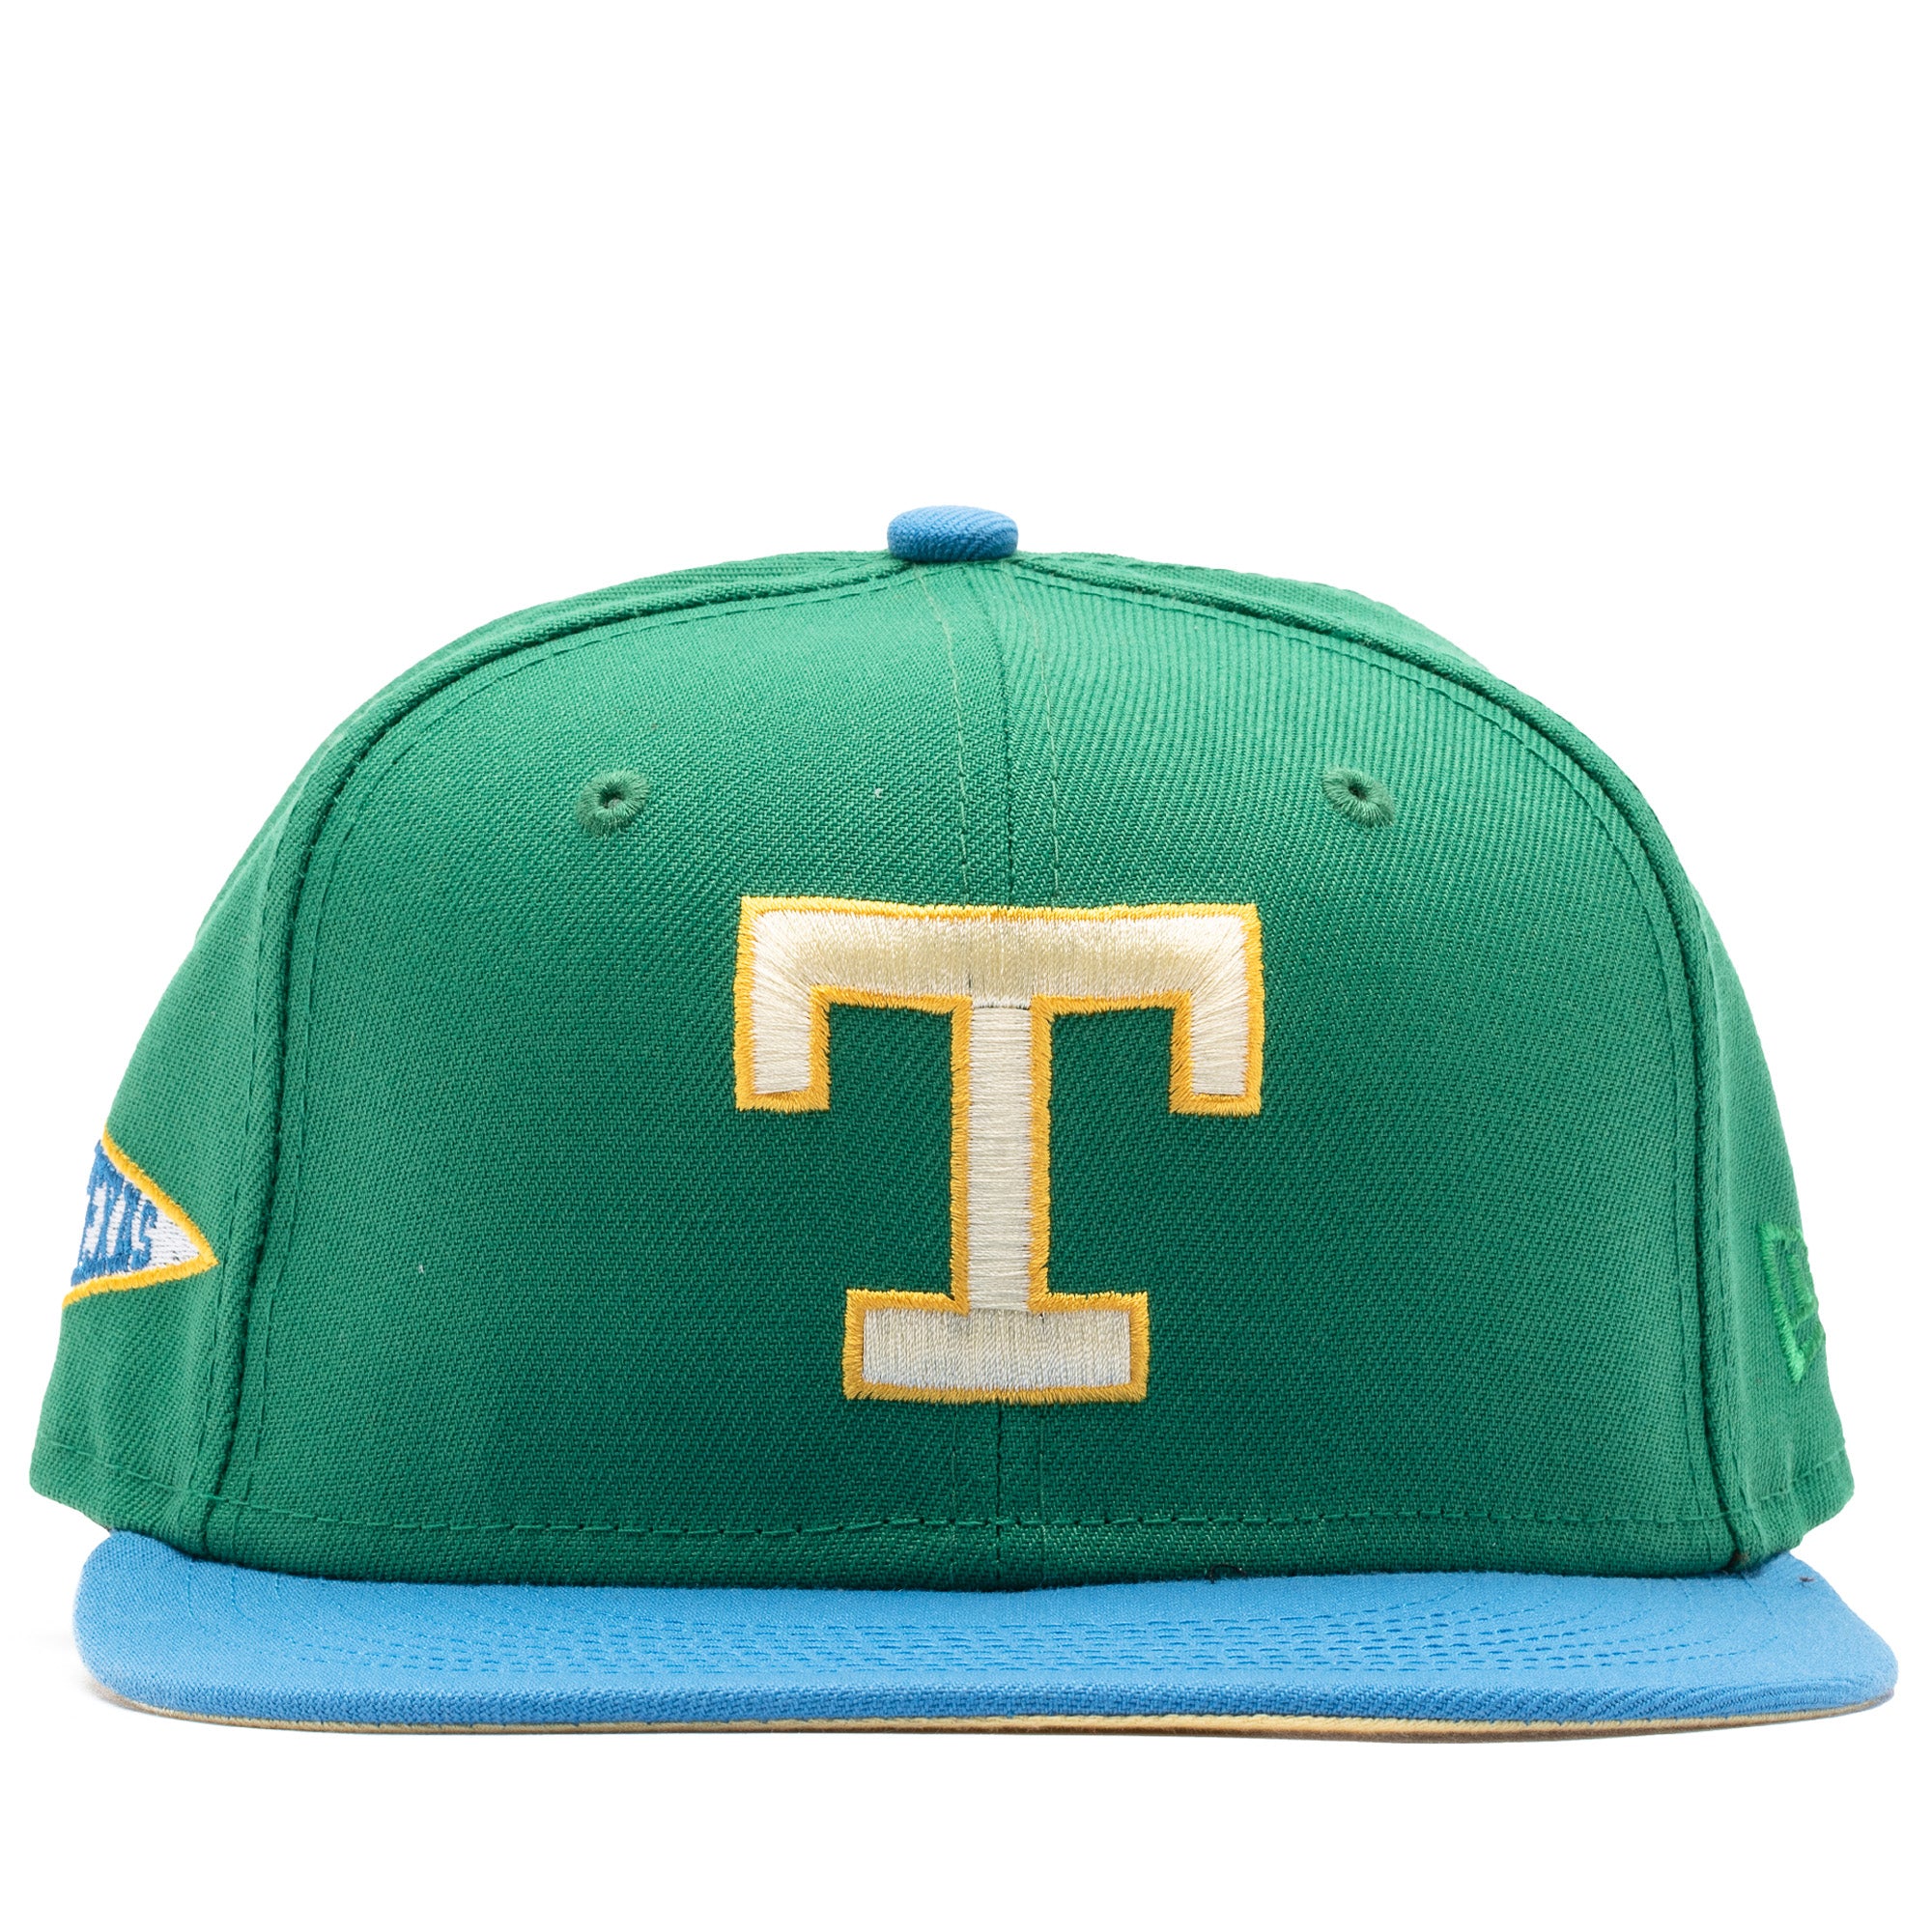 New Era x Politics Texas Rangers 59FIFTY Fitted Hat - Botanical Green/Air Force Blue, Size 7 5/8 by Sneaker Politics